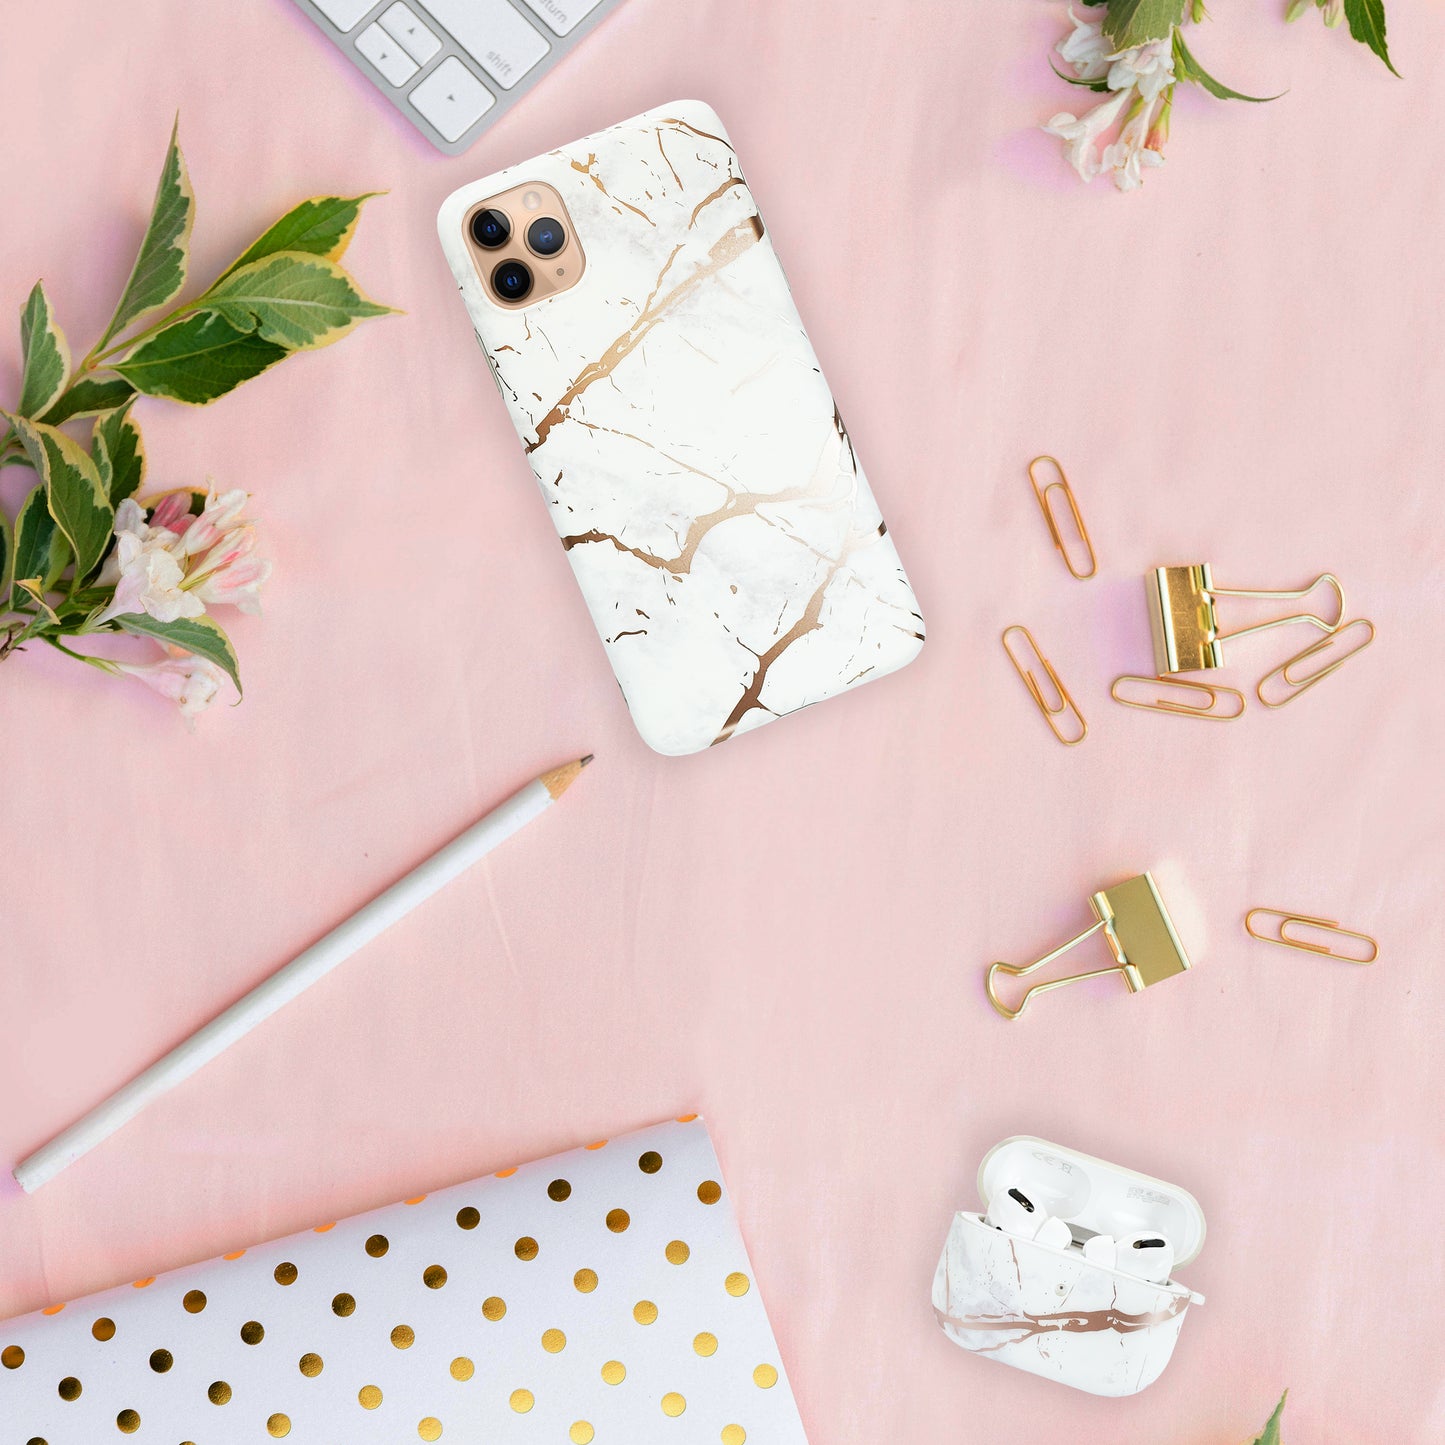 White and Rose Gold Silicon iPhone Case with AirPods Pro